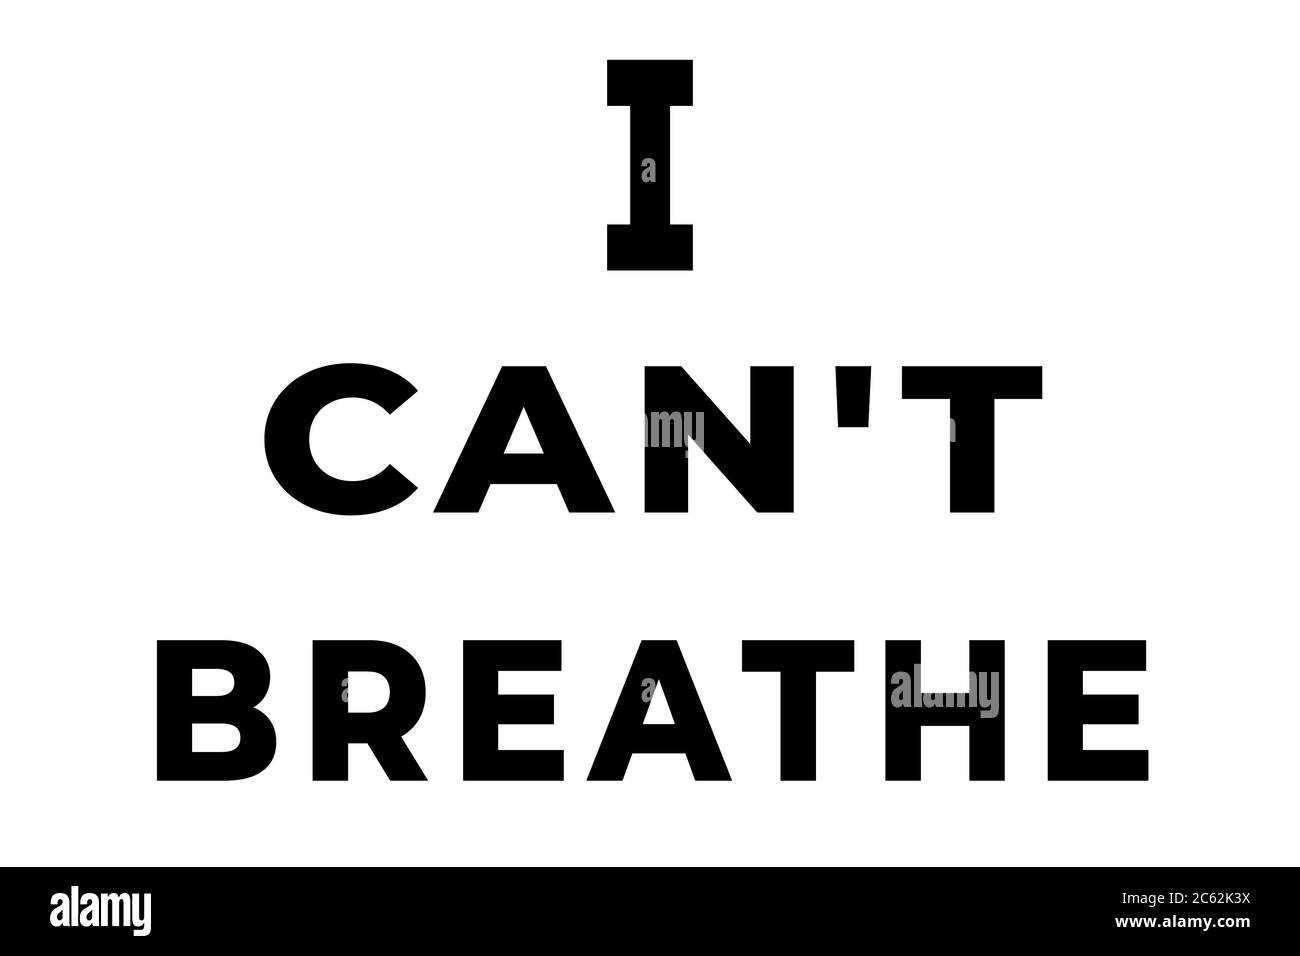 I Can't Breathe. Text message for protest action. Stop violence. Anti-racist message. White background Stock Photo